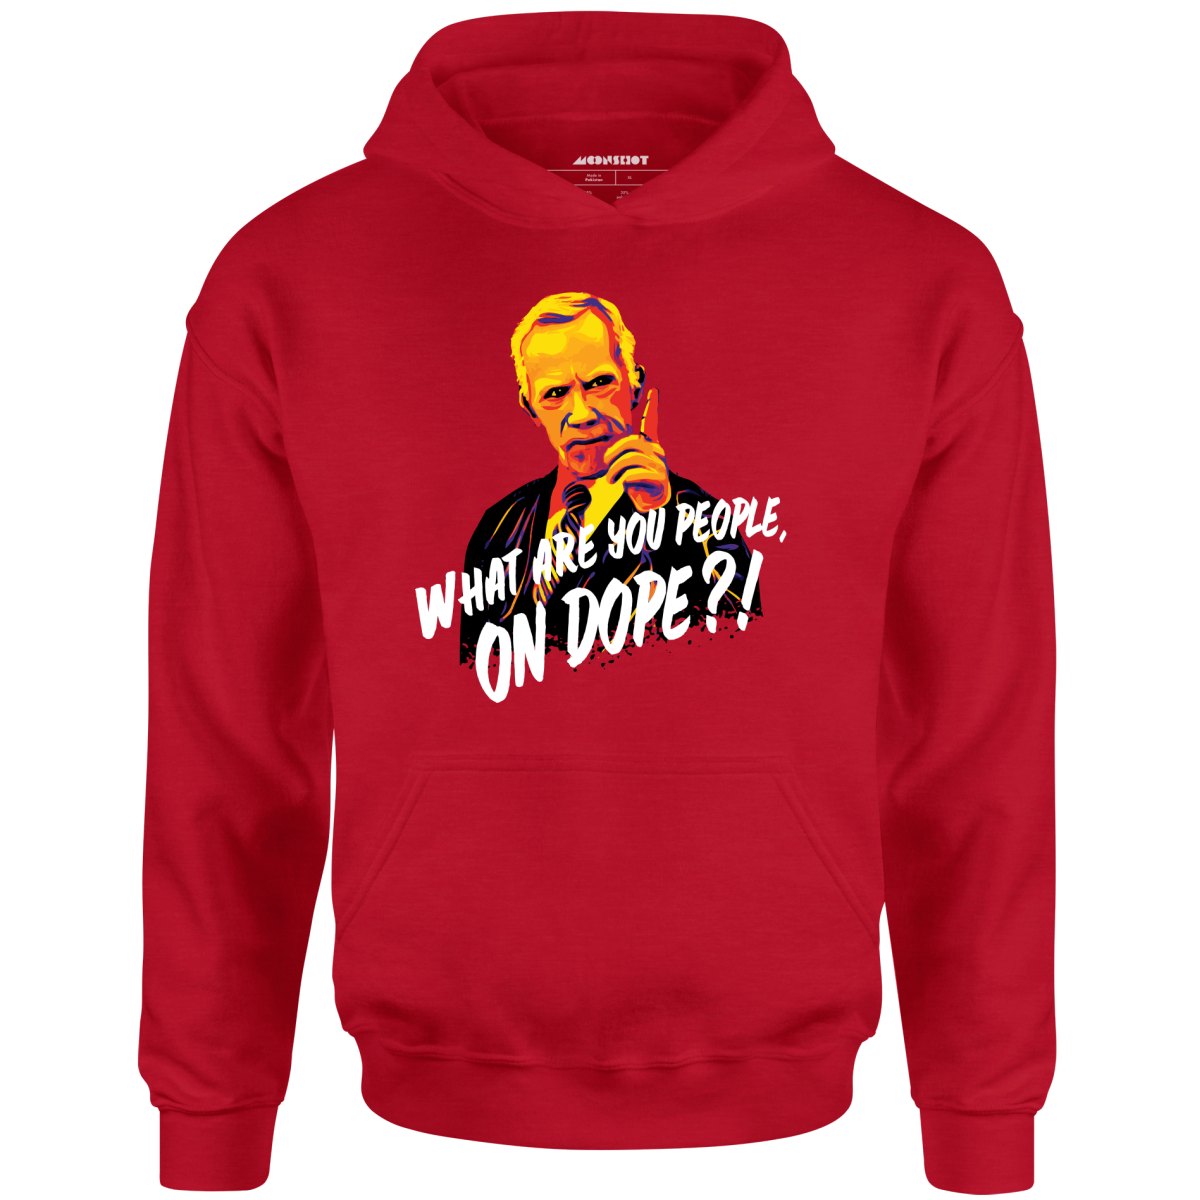 Mr. Hand - What Are You People, On Dope? - Unisex Hoodie